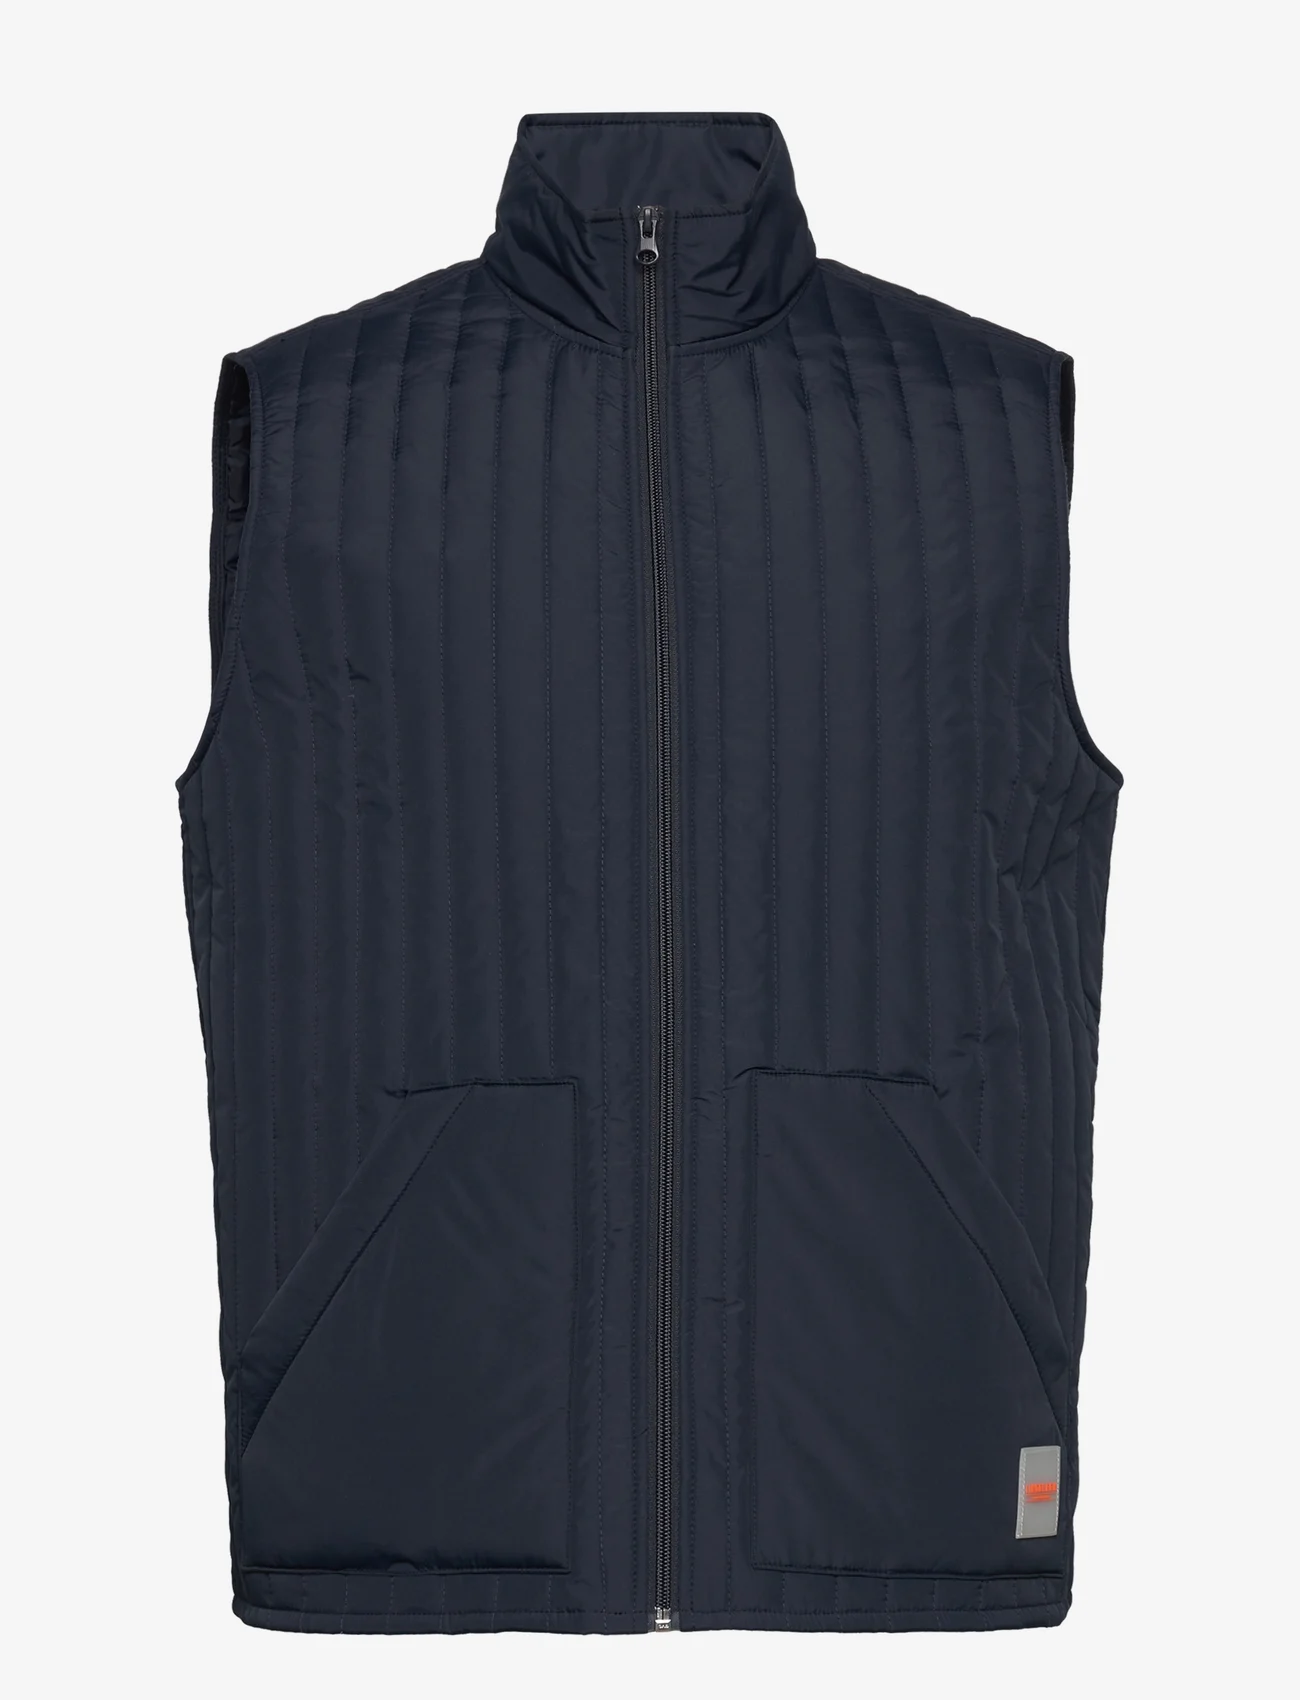 Lindbergh - Vertical quilted waistcoat - vests - navy - 0